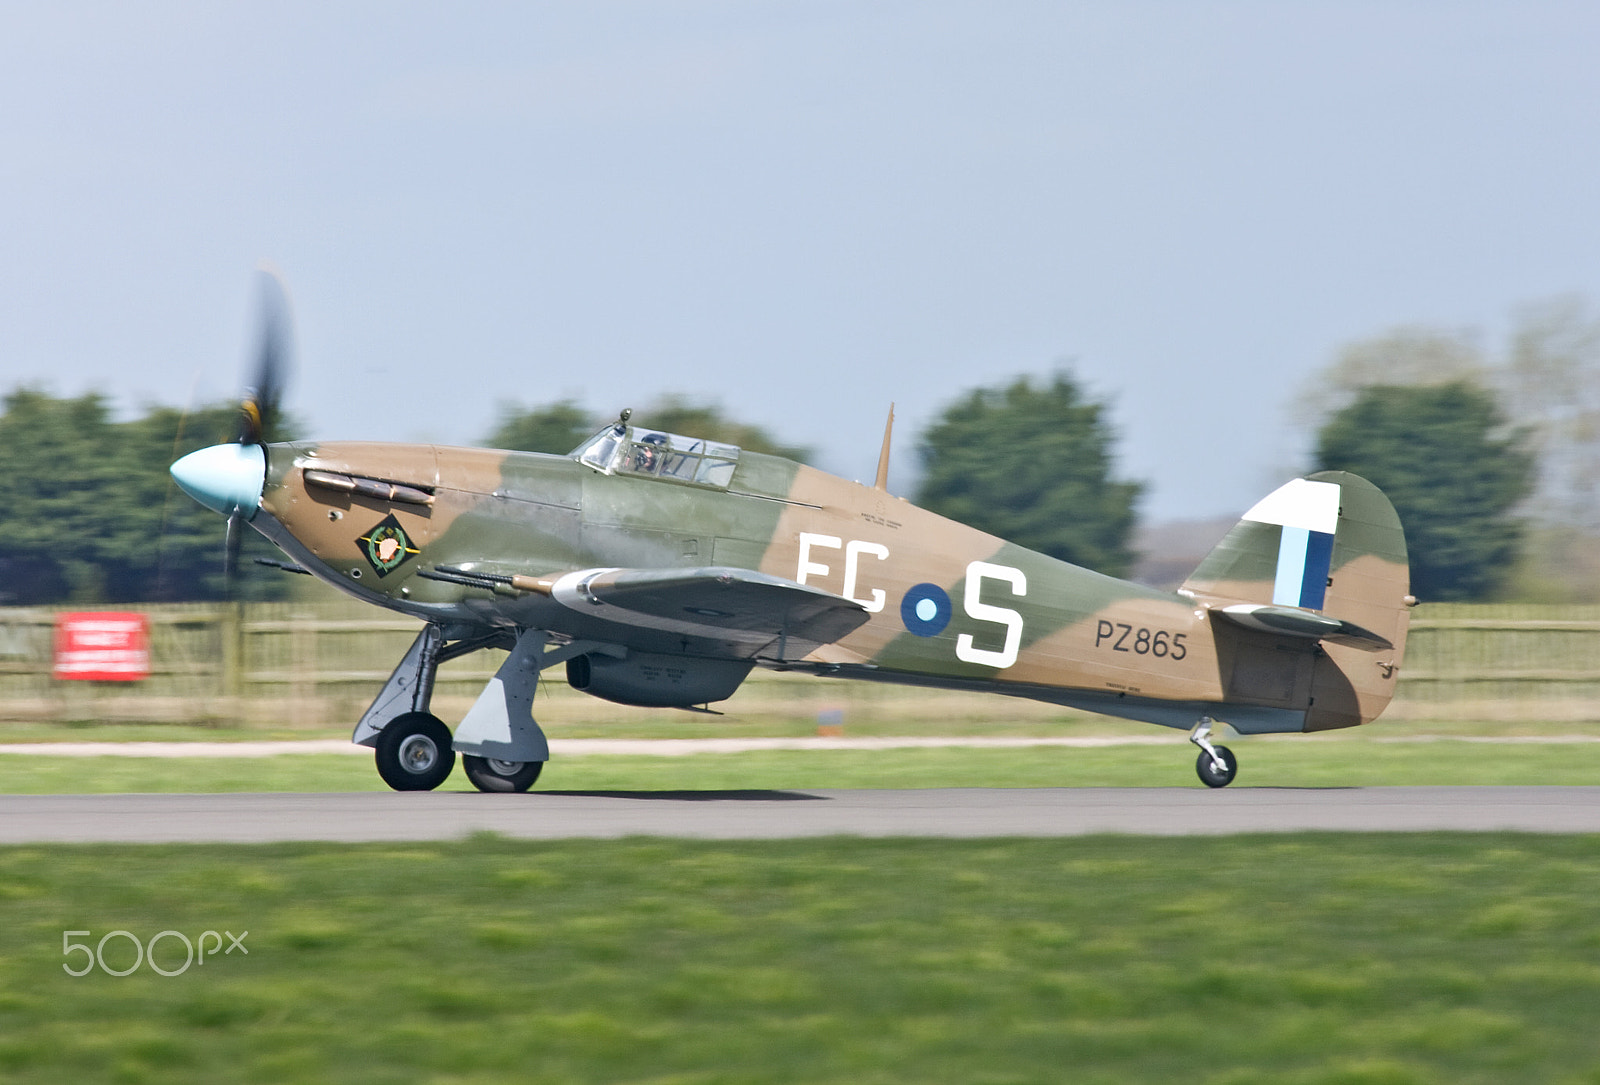 Canon EOS 40D + Canon EF 100-400mm F4.5-5.6L IS USM sample photo. Hawker hurricane mk.iic, pz865. photography